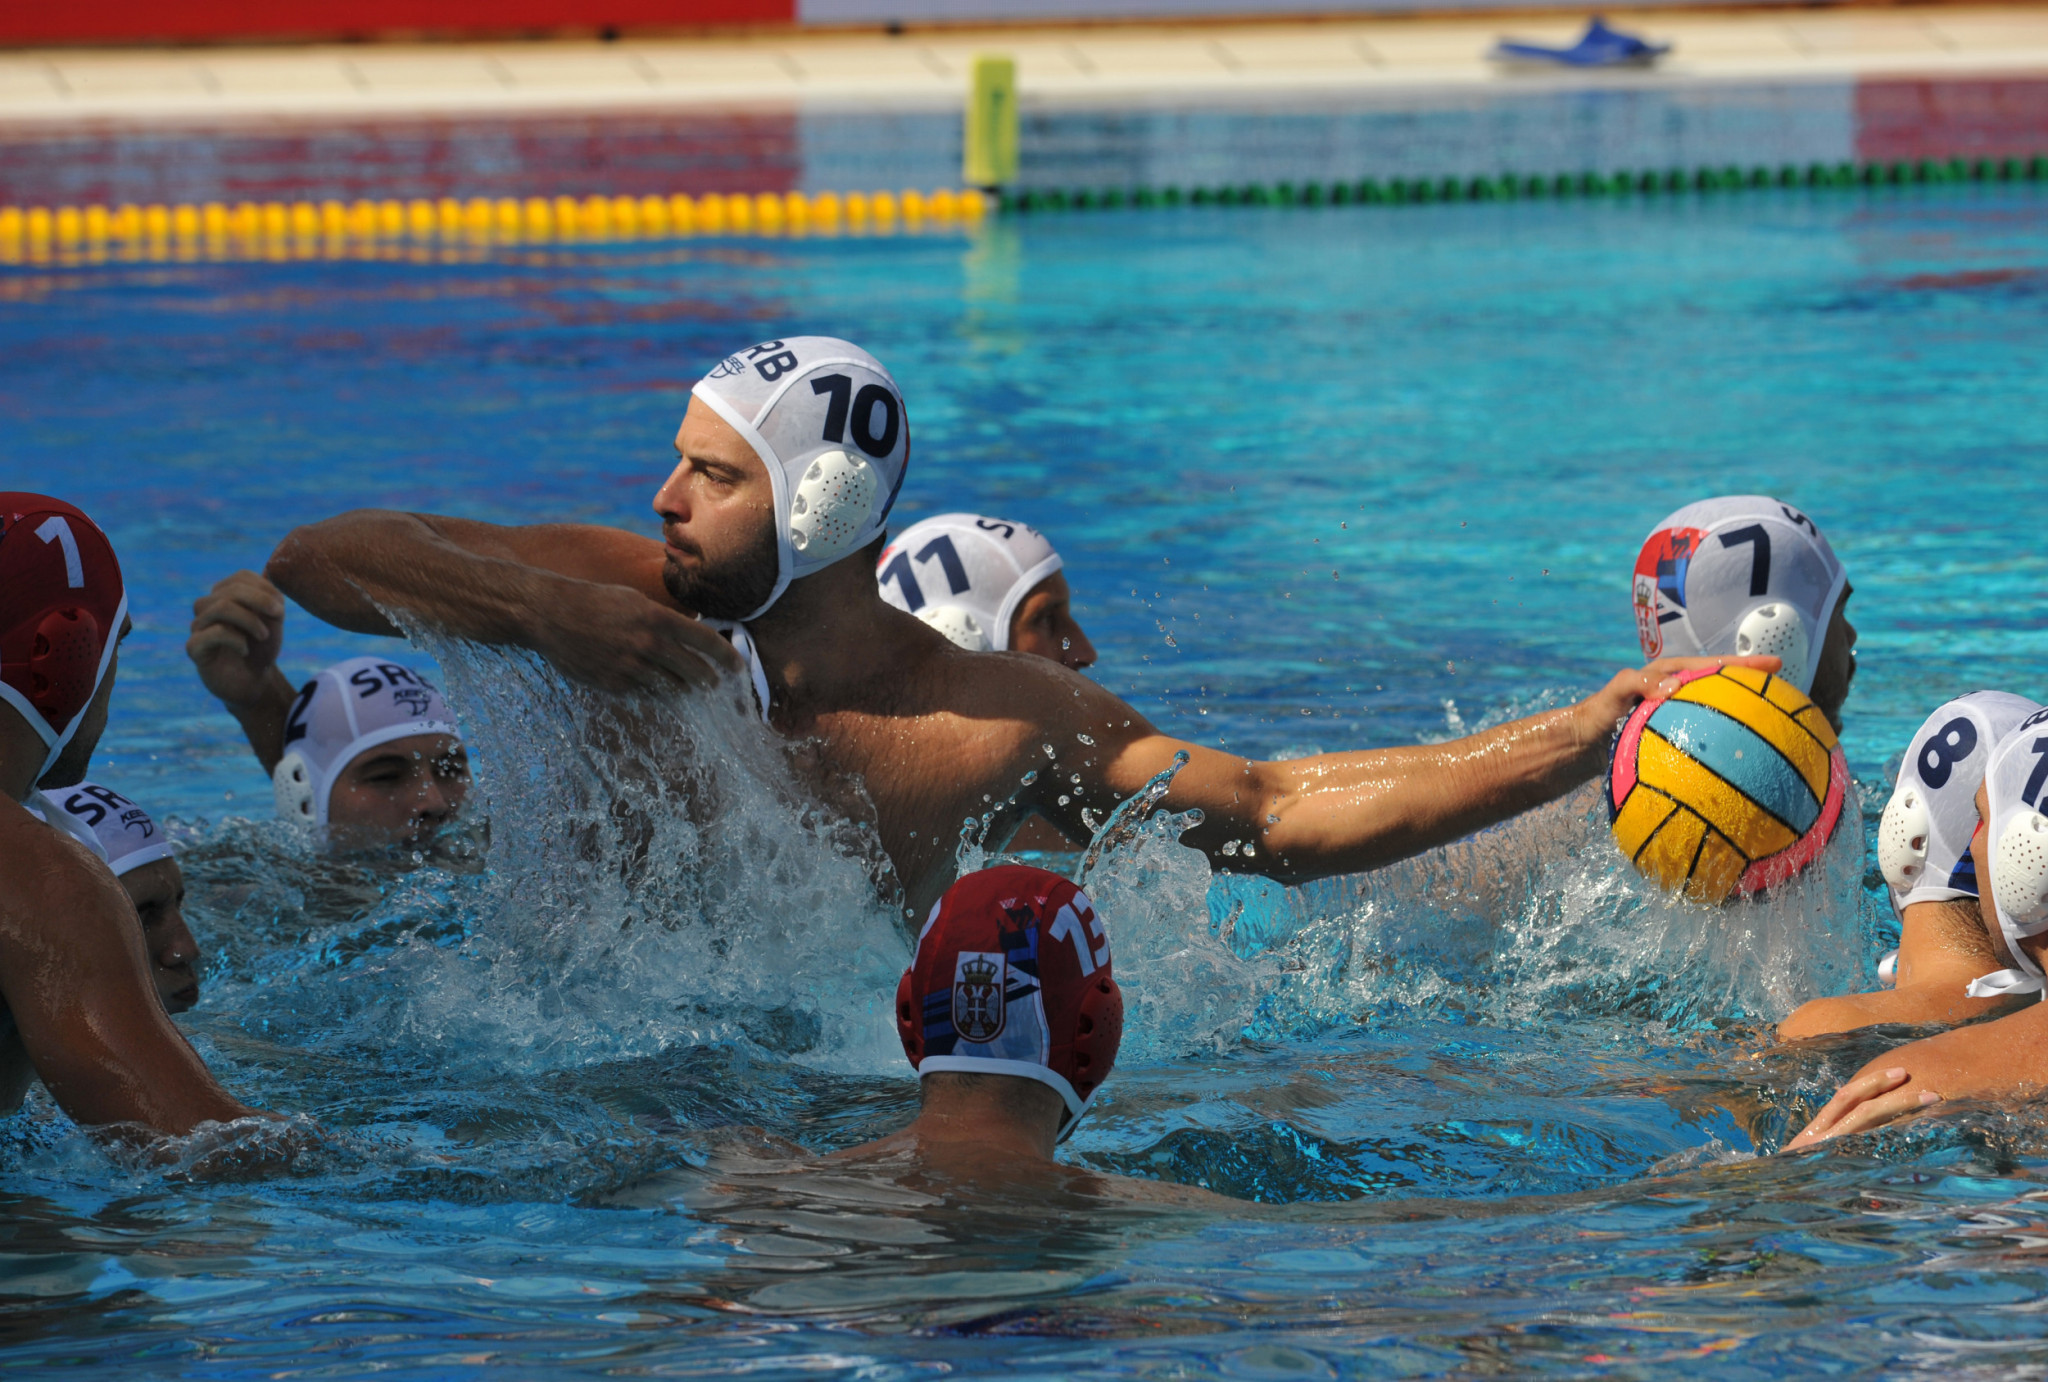  Serbia beat Spanish hosts in penalty shoot-out to win fifth European Water Polo title